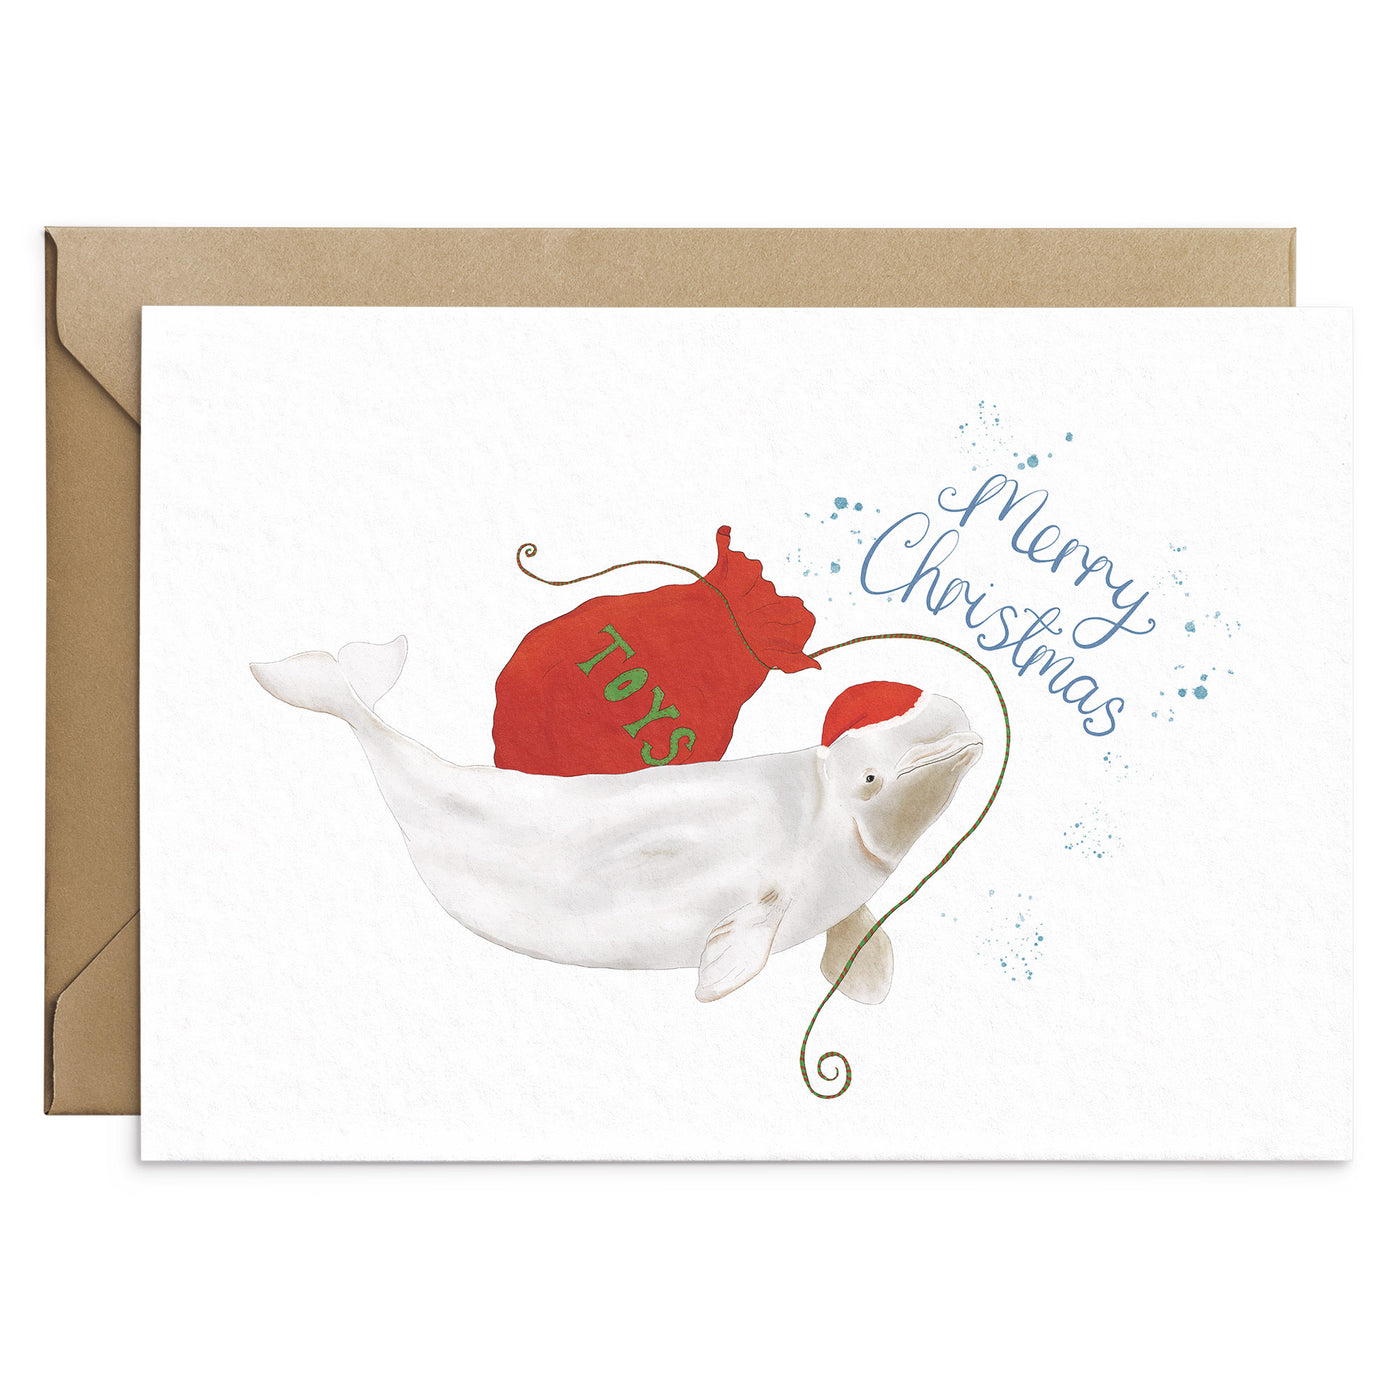 Beluga Whale Christmas Card - Poppins & Co.